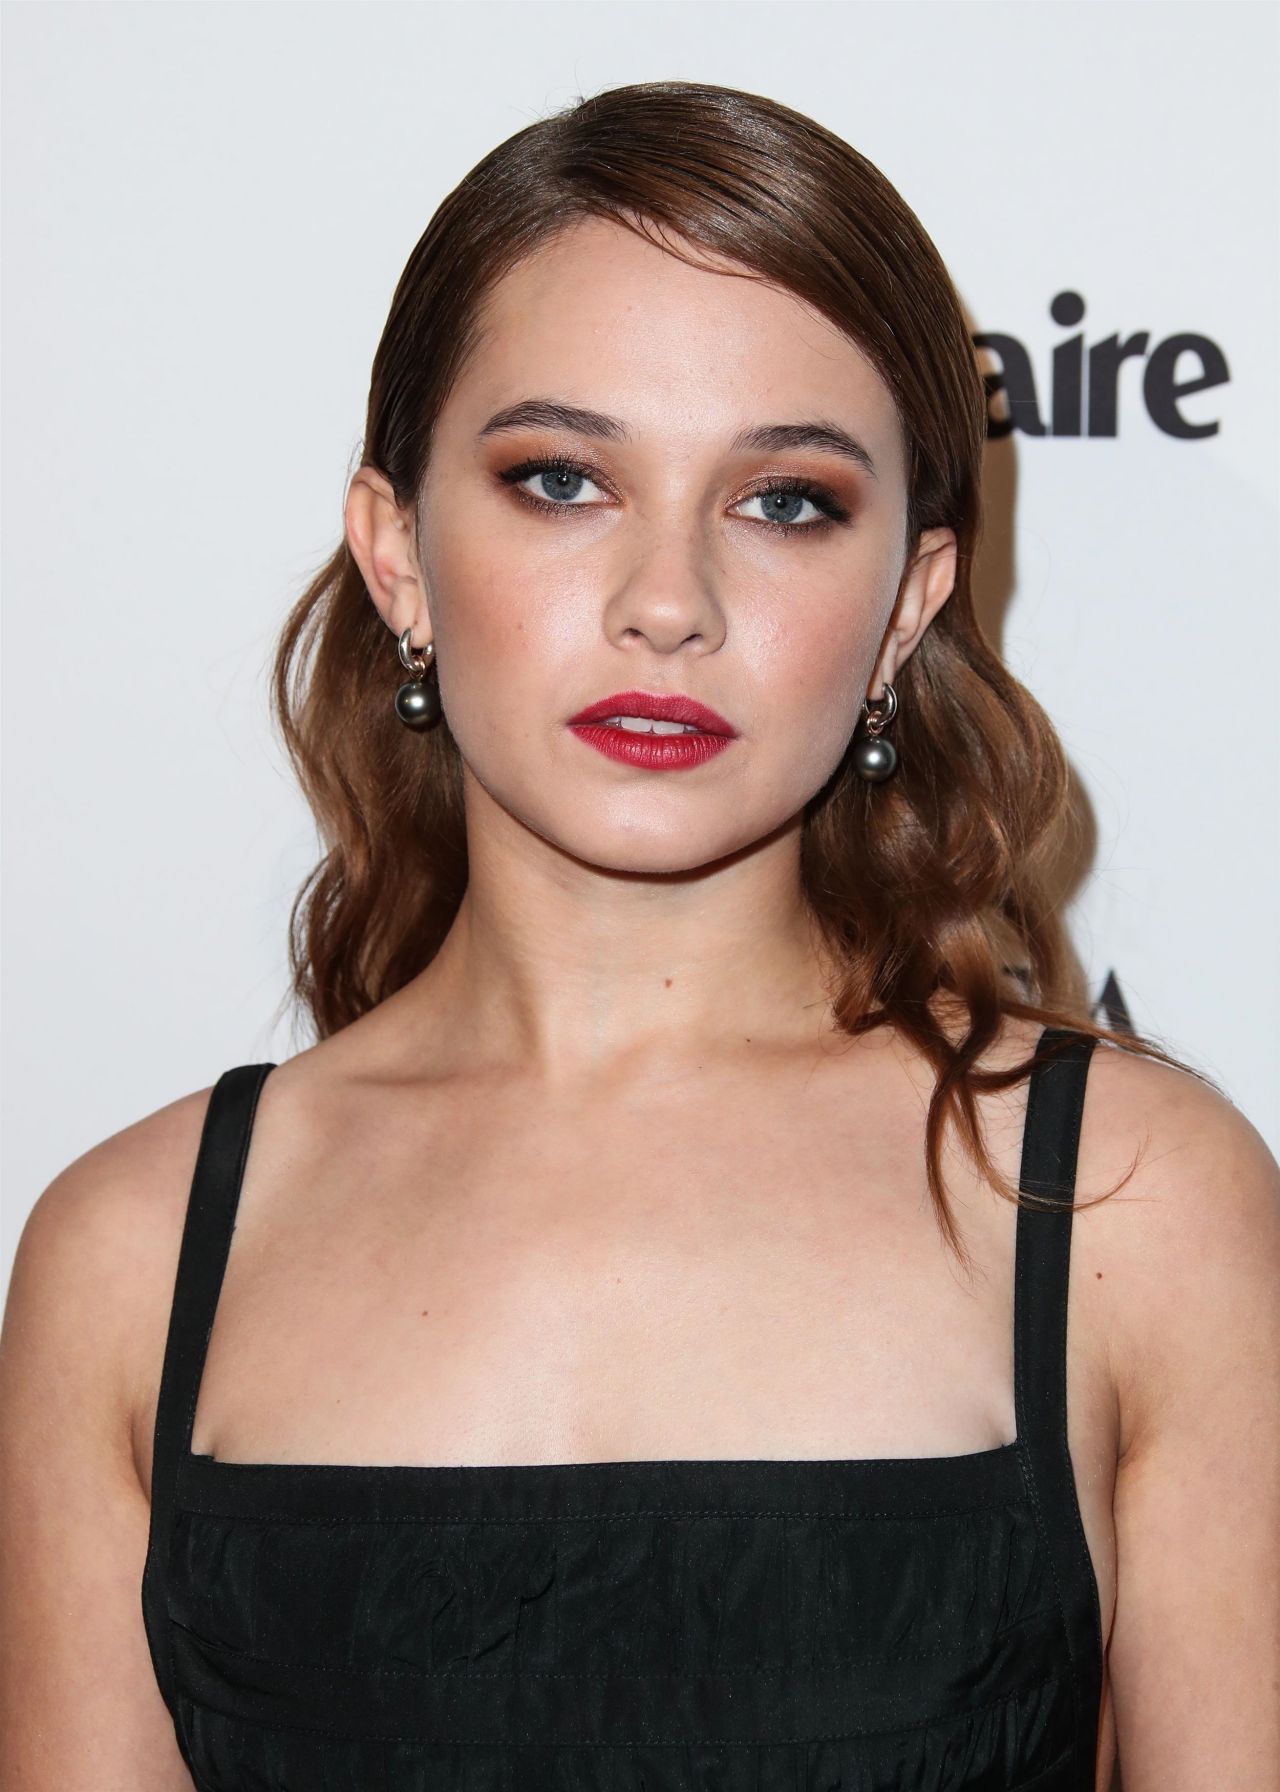 Cailee Spaeny 2018 Wallpapers